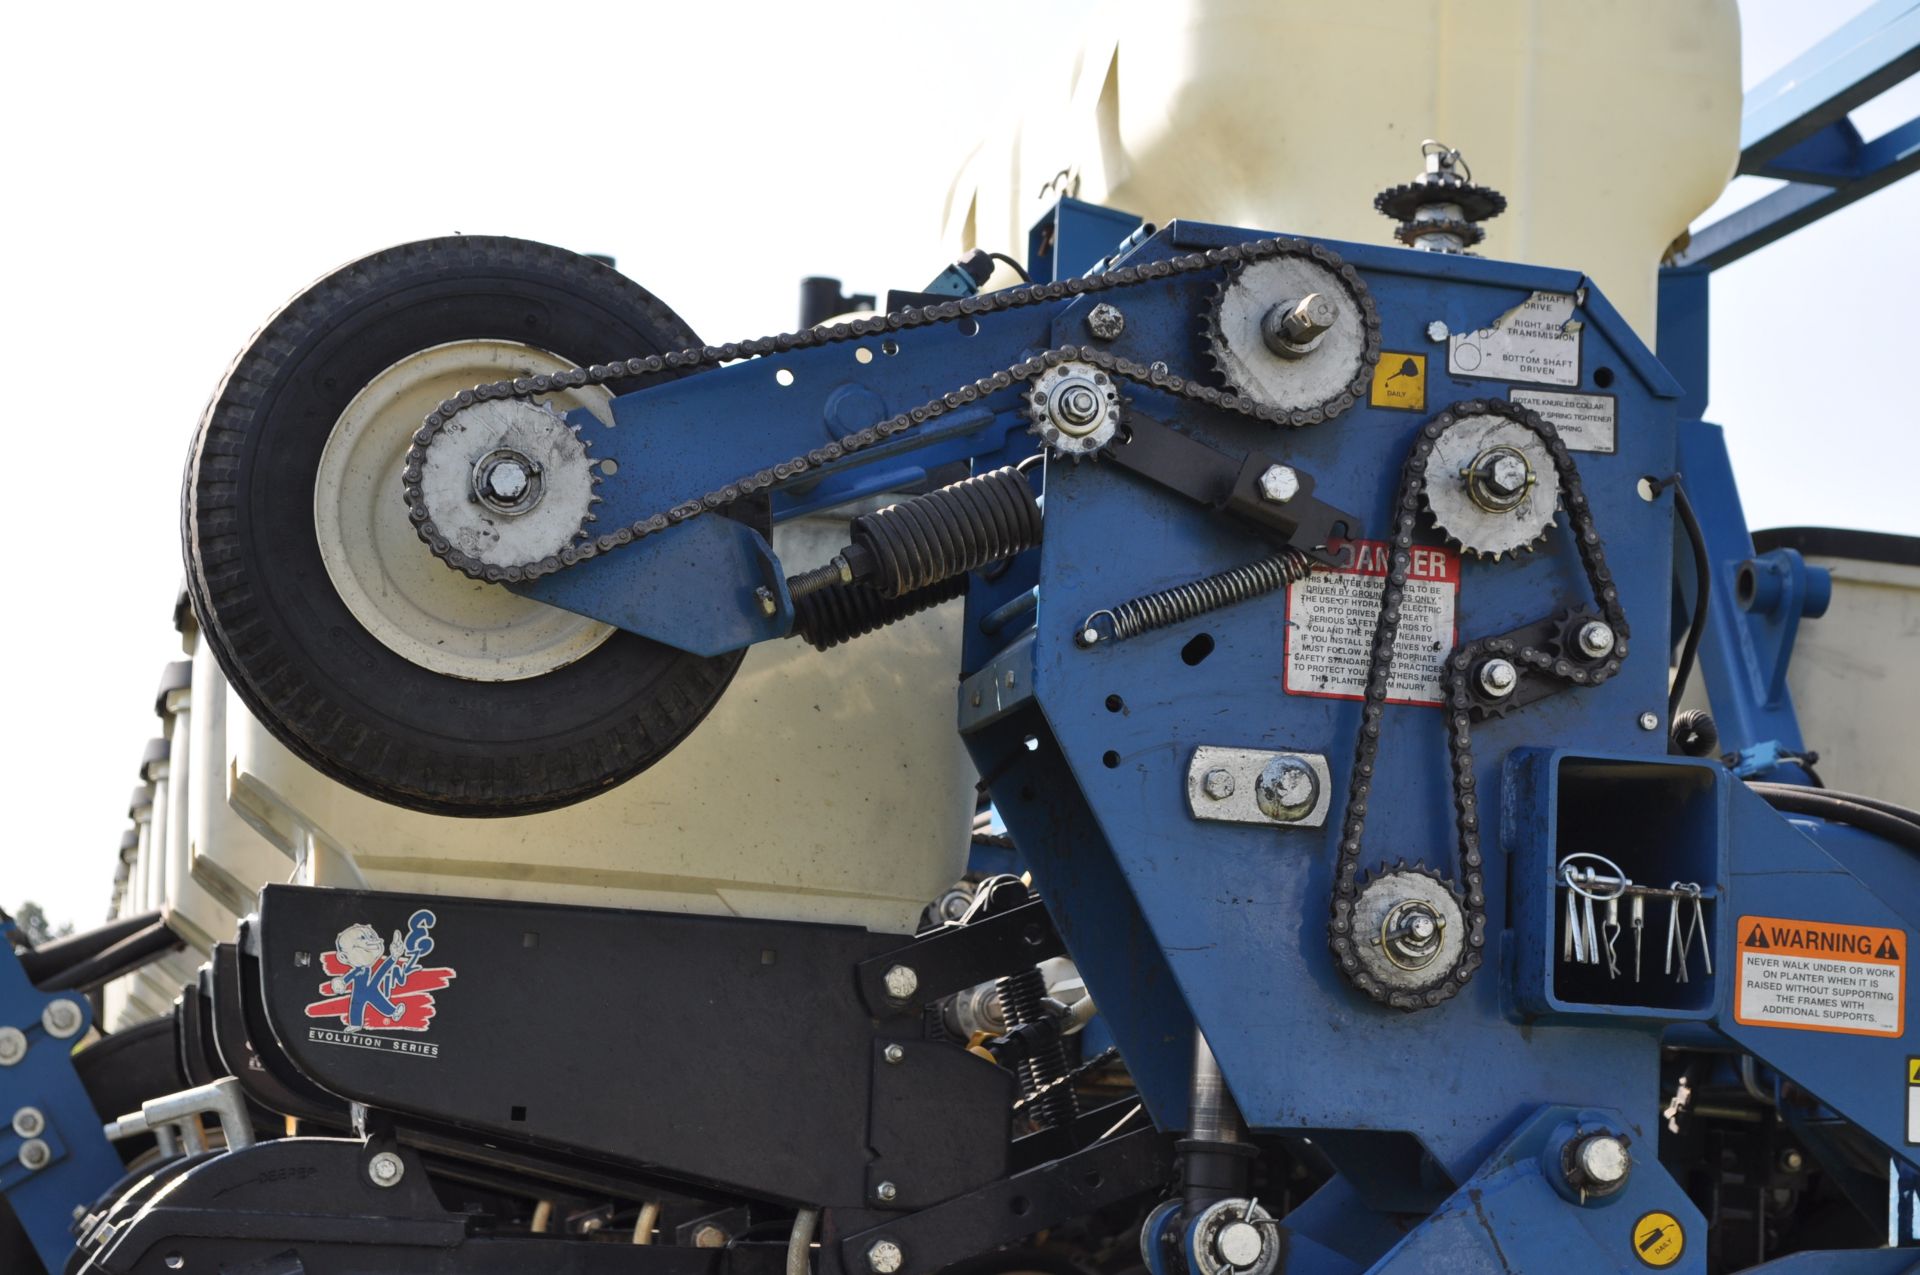 Kinze 3650 12/24 splitter planter, floating row cleaners on corn rows, no till coulters, box units - Image 20 of 20